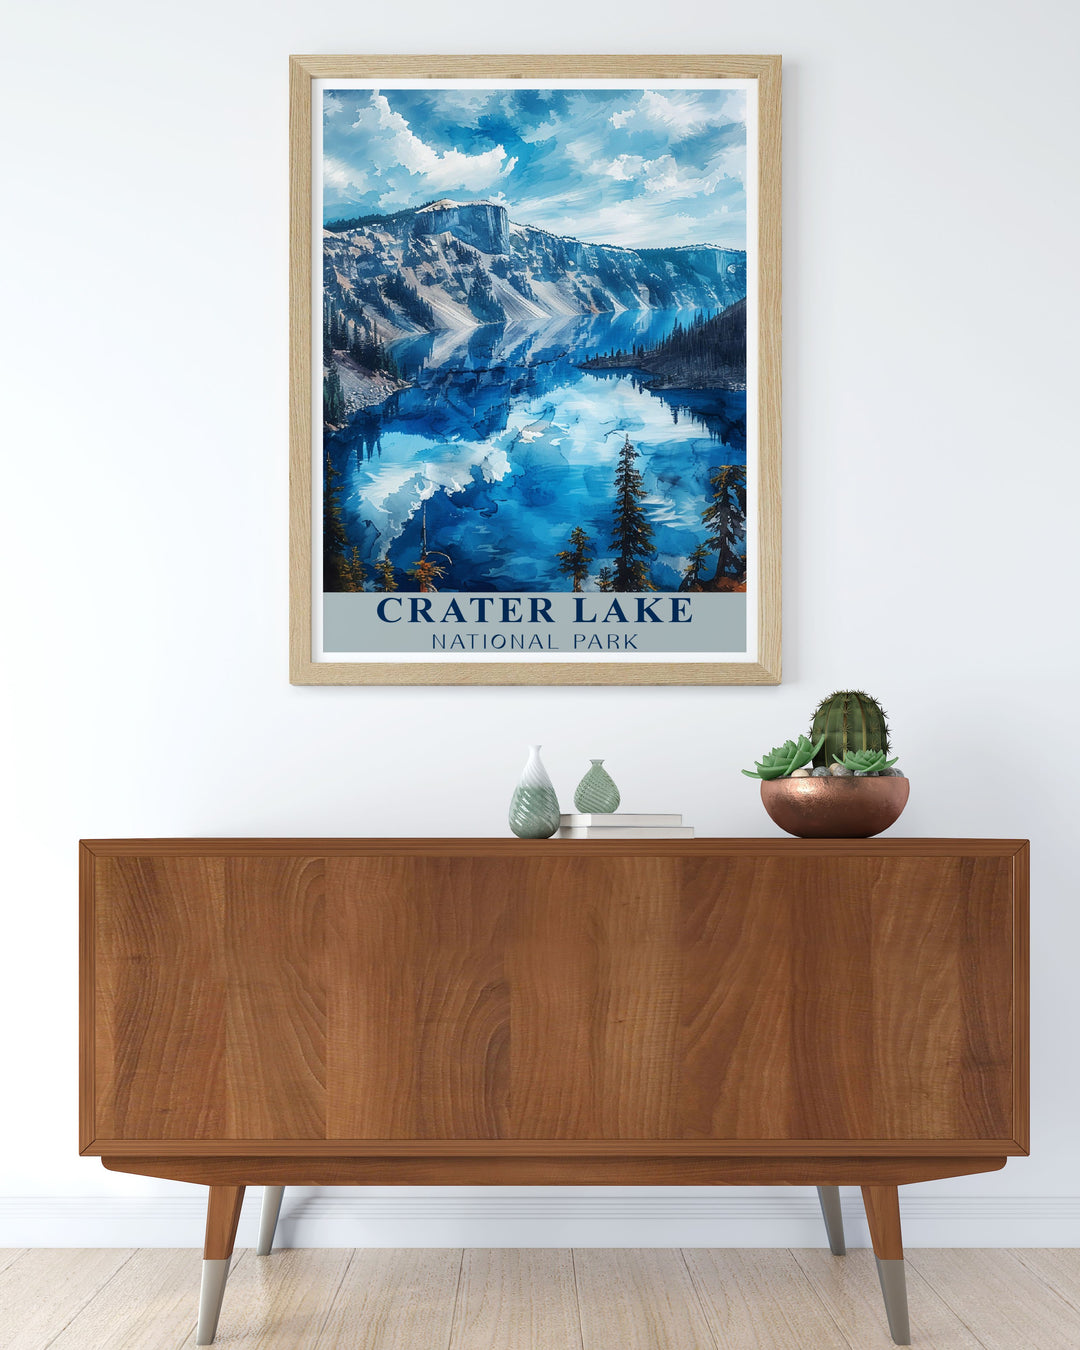 Captivating Caldera Wall Art showcasing Crater Lake and its stunning natural beauty. Perfect for home decor and gifting. These prints bring the majestic landscapes of Crater Lake into your living space.